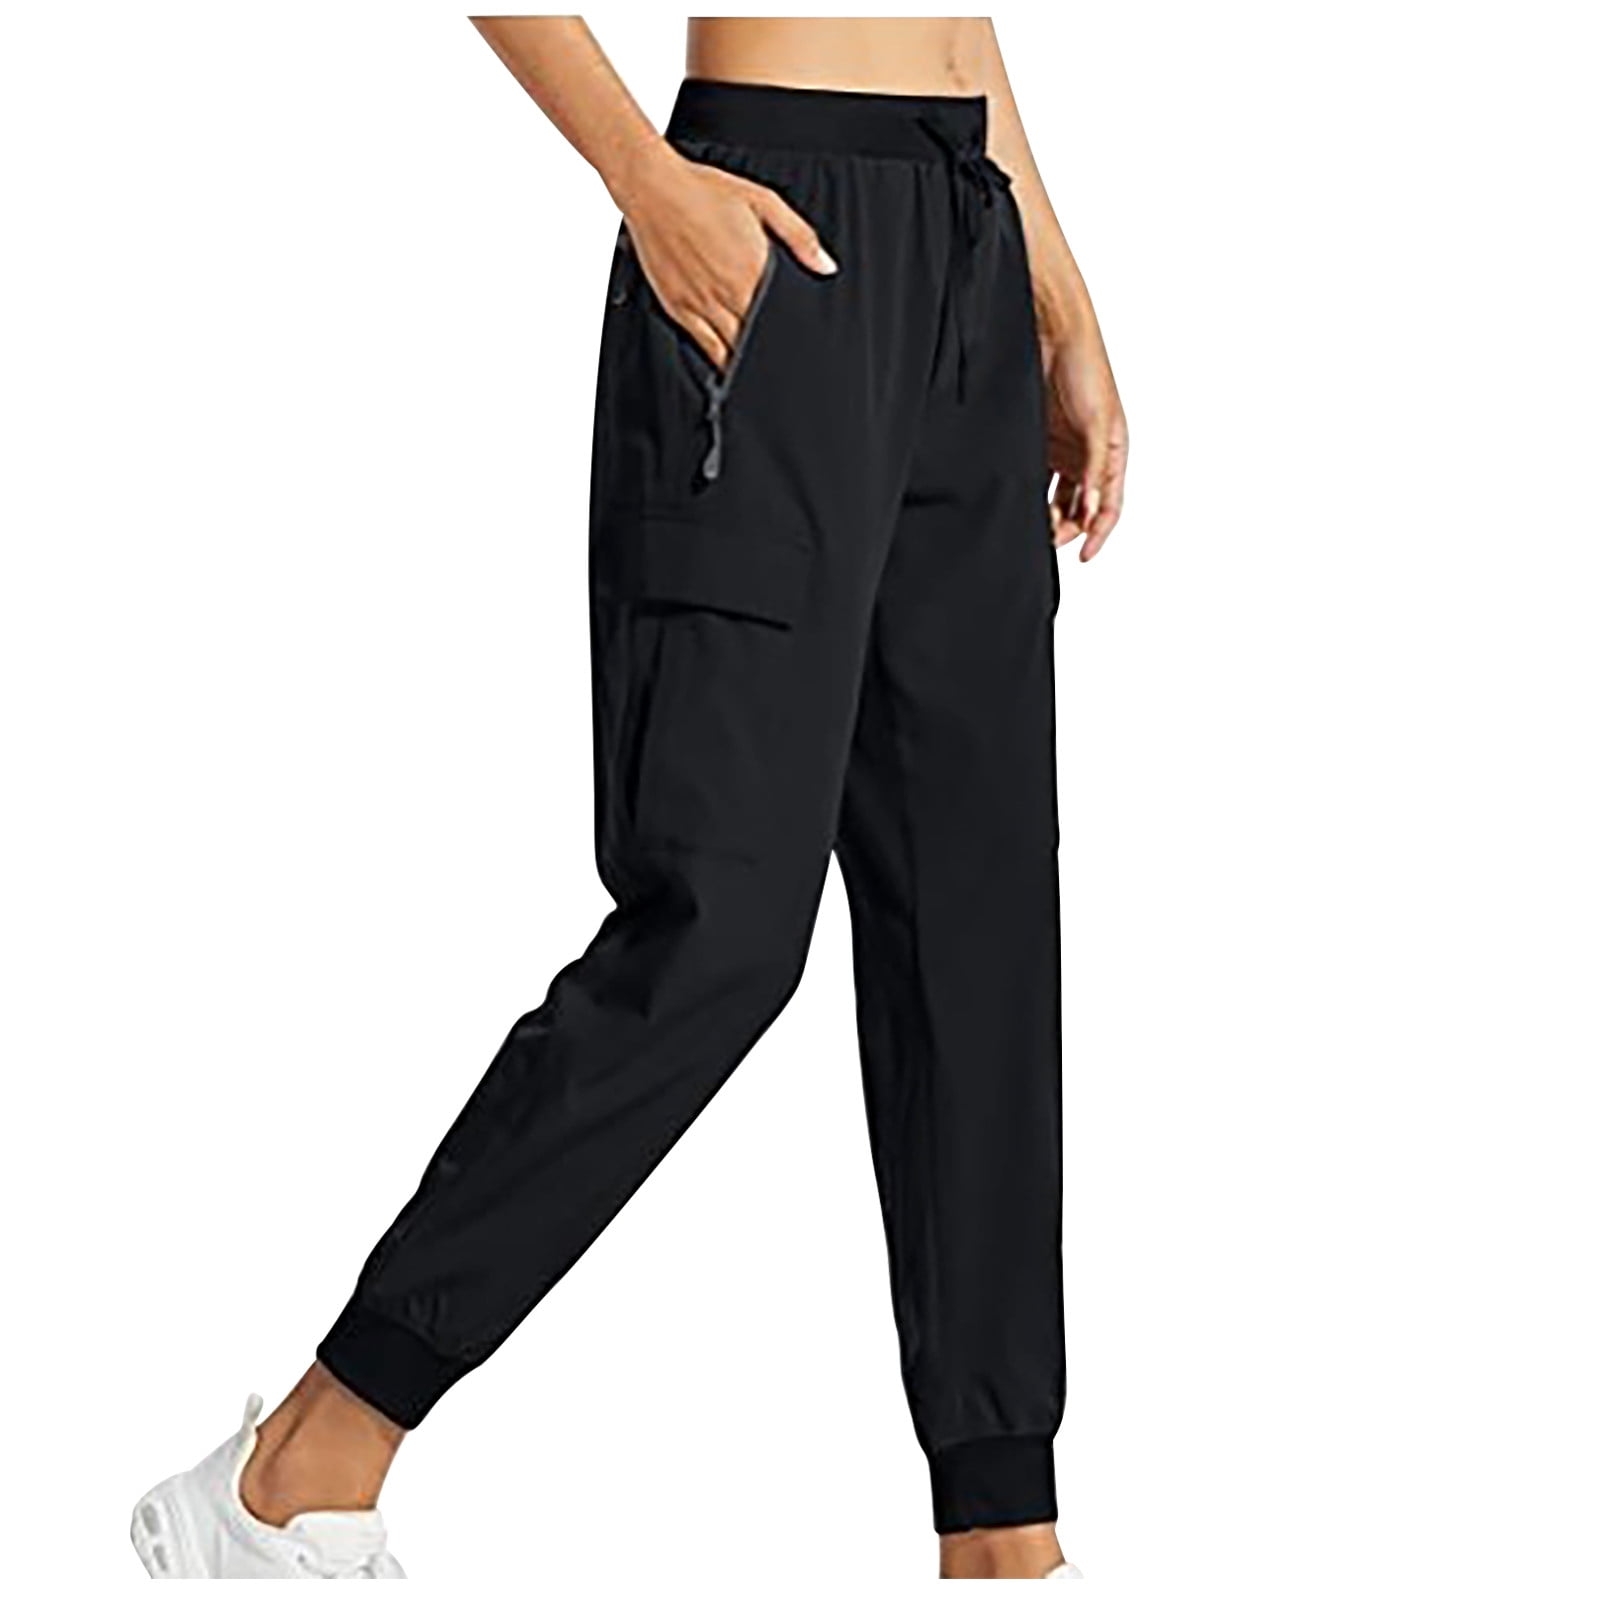 Casual Sports Pants, Drawstring Sweatpants Gray For Outdoor Activities For  Women S 